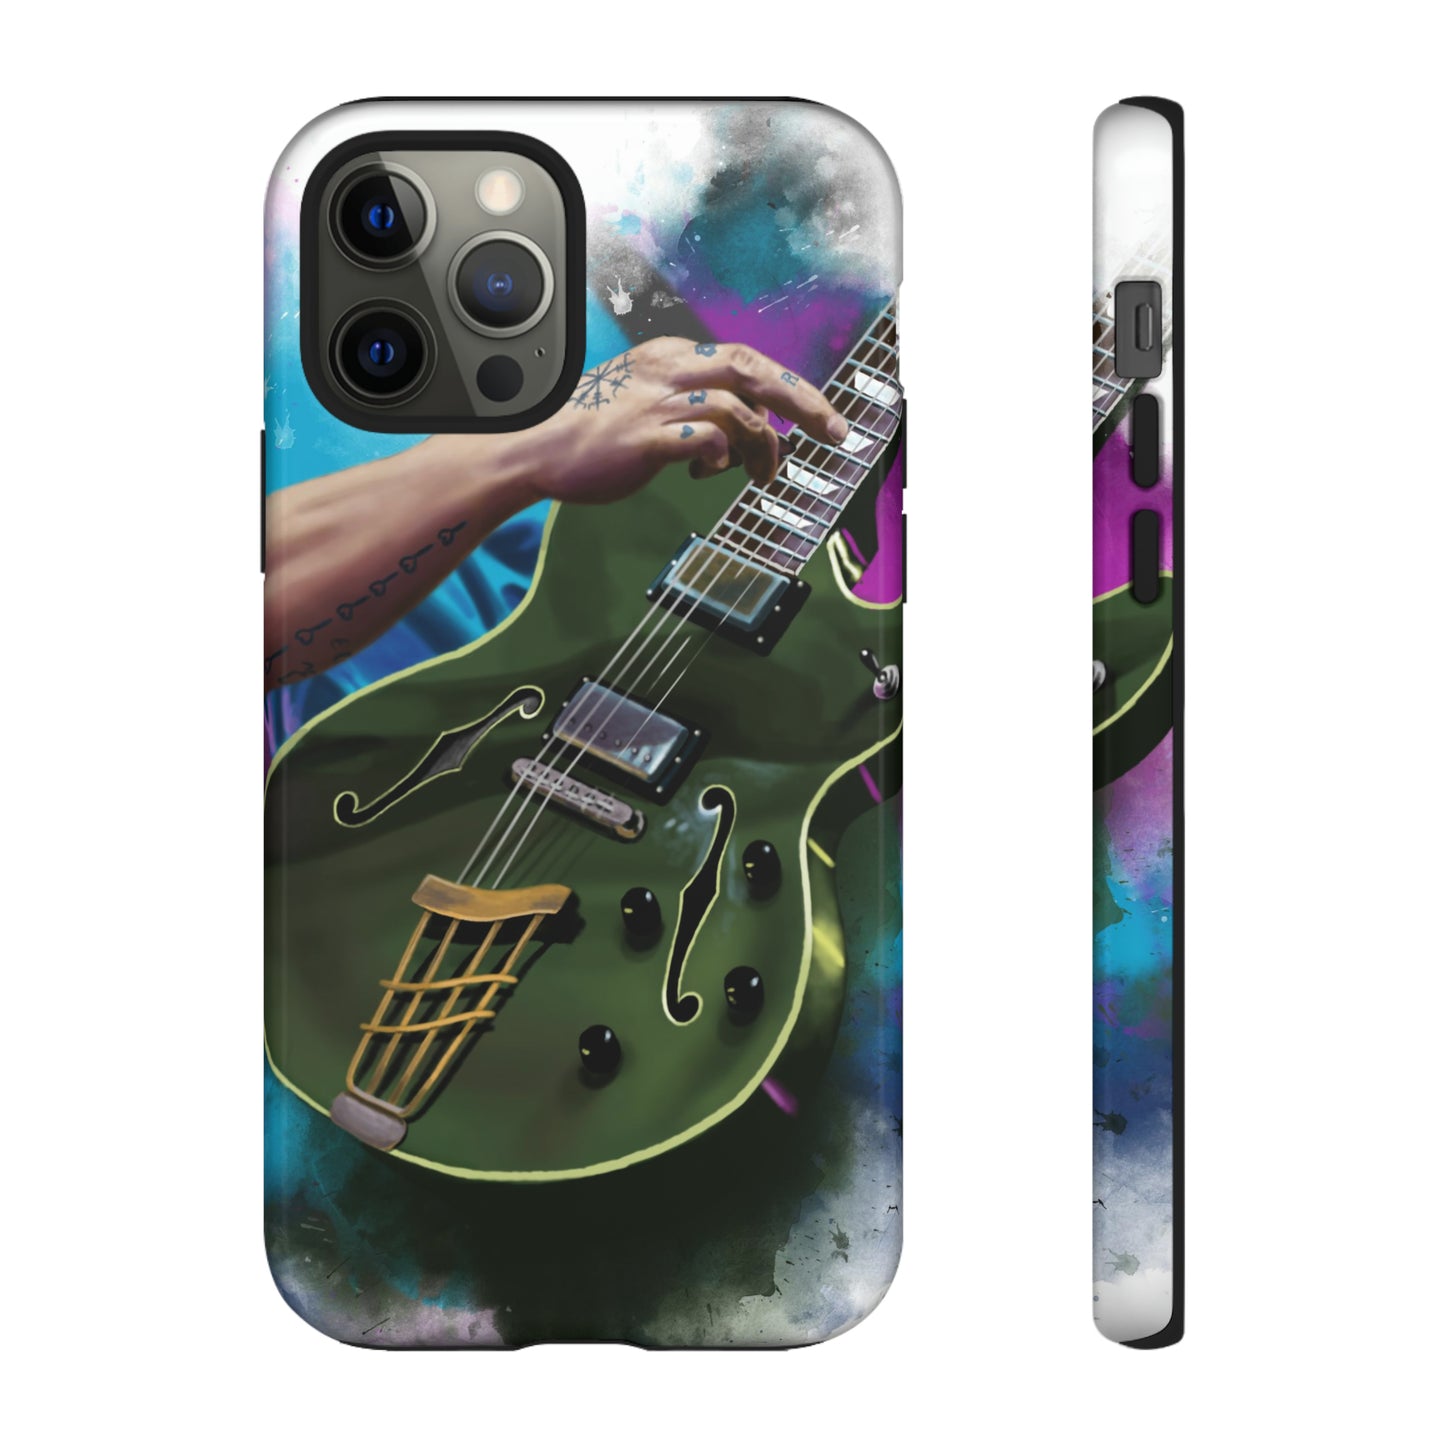 Digital painting of an olive green electric guitar with hand printed on iphone tough case